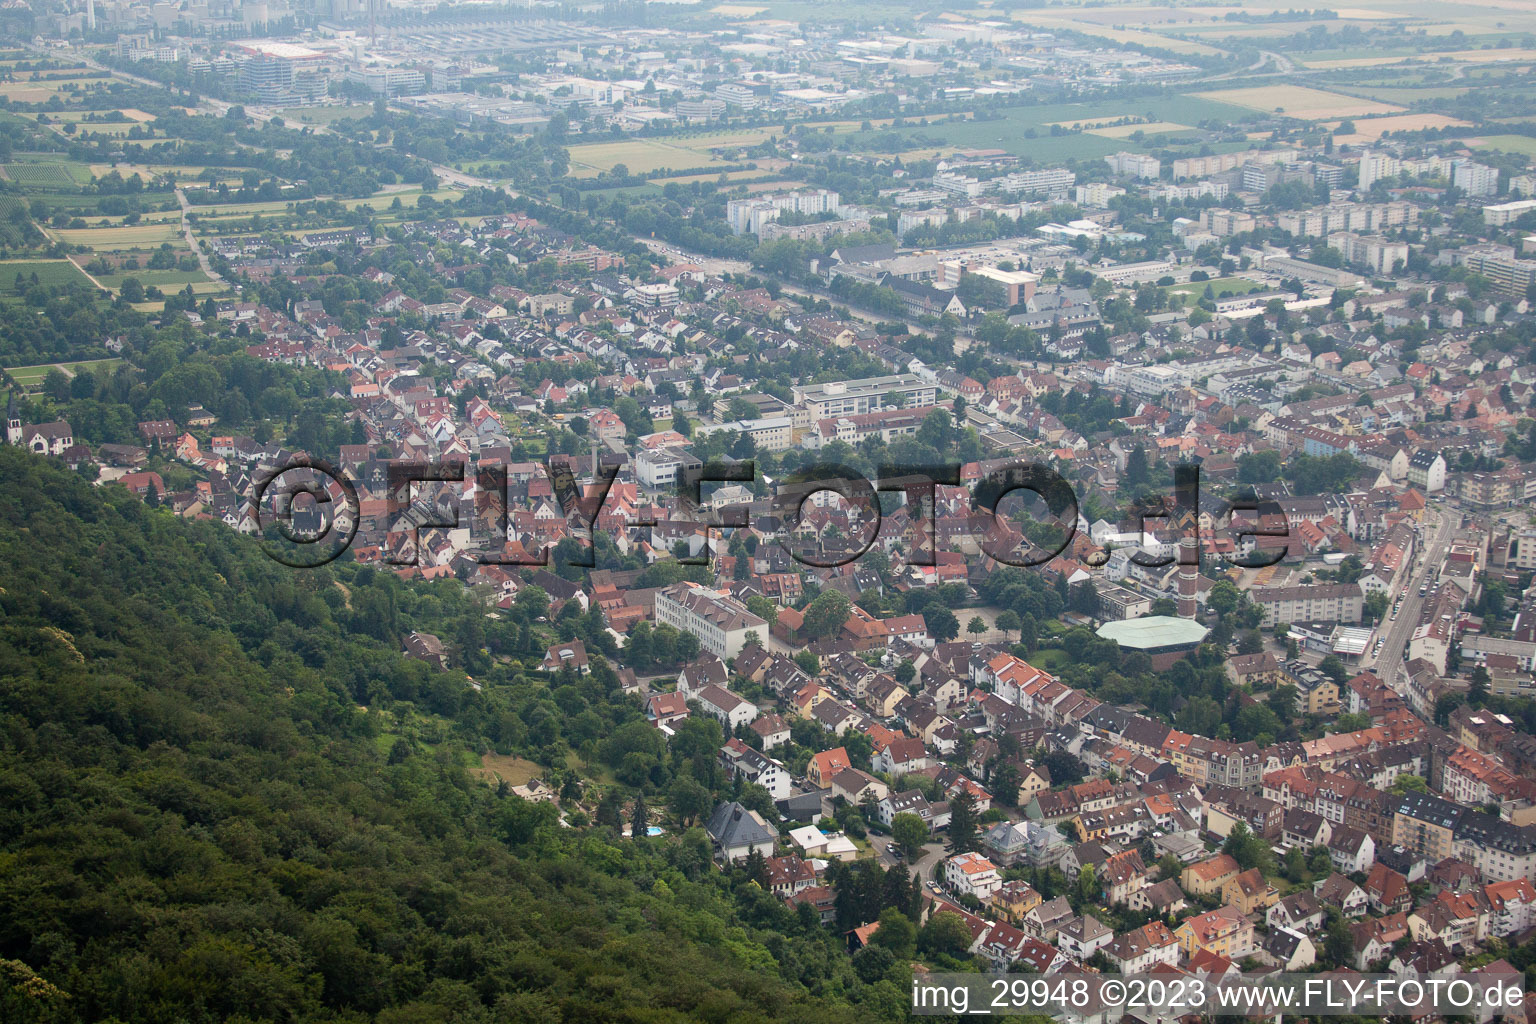 Drone image of District Rohrbach in Heidelberg in the state Baden-Wuerttemberg, Germany